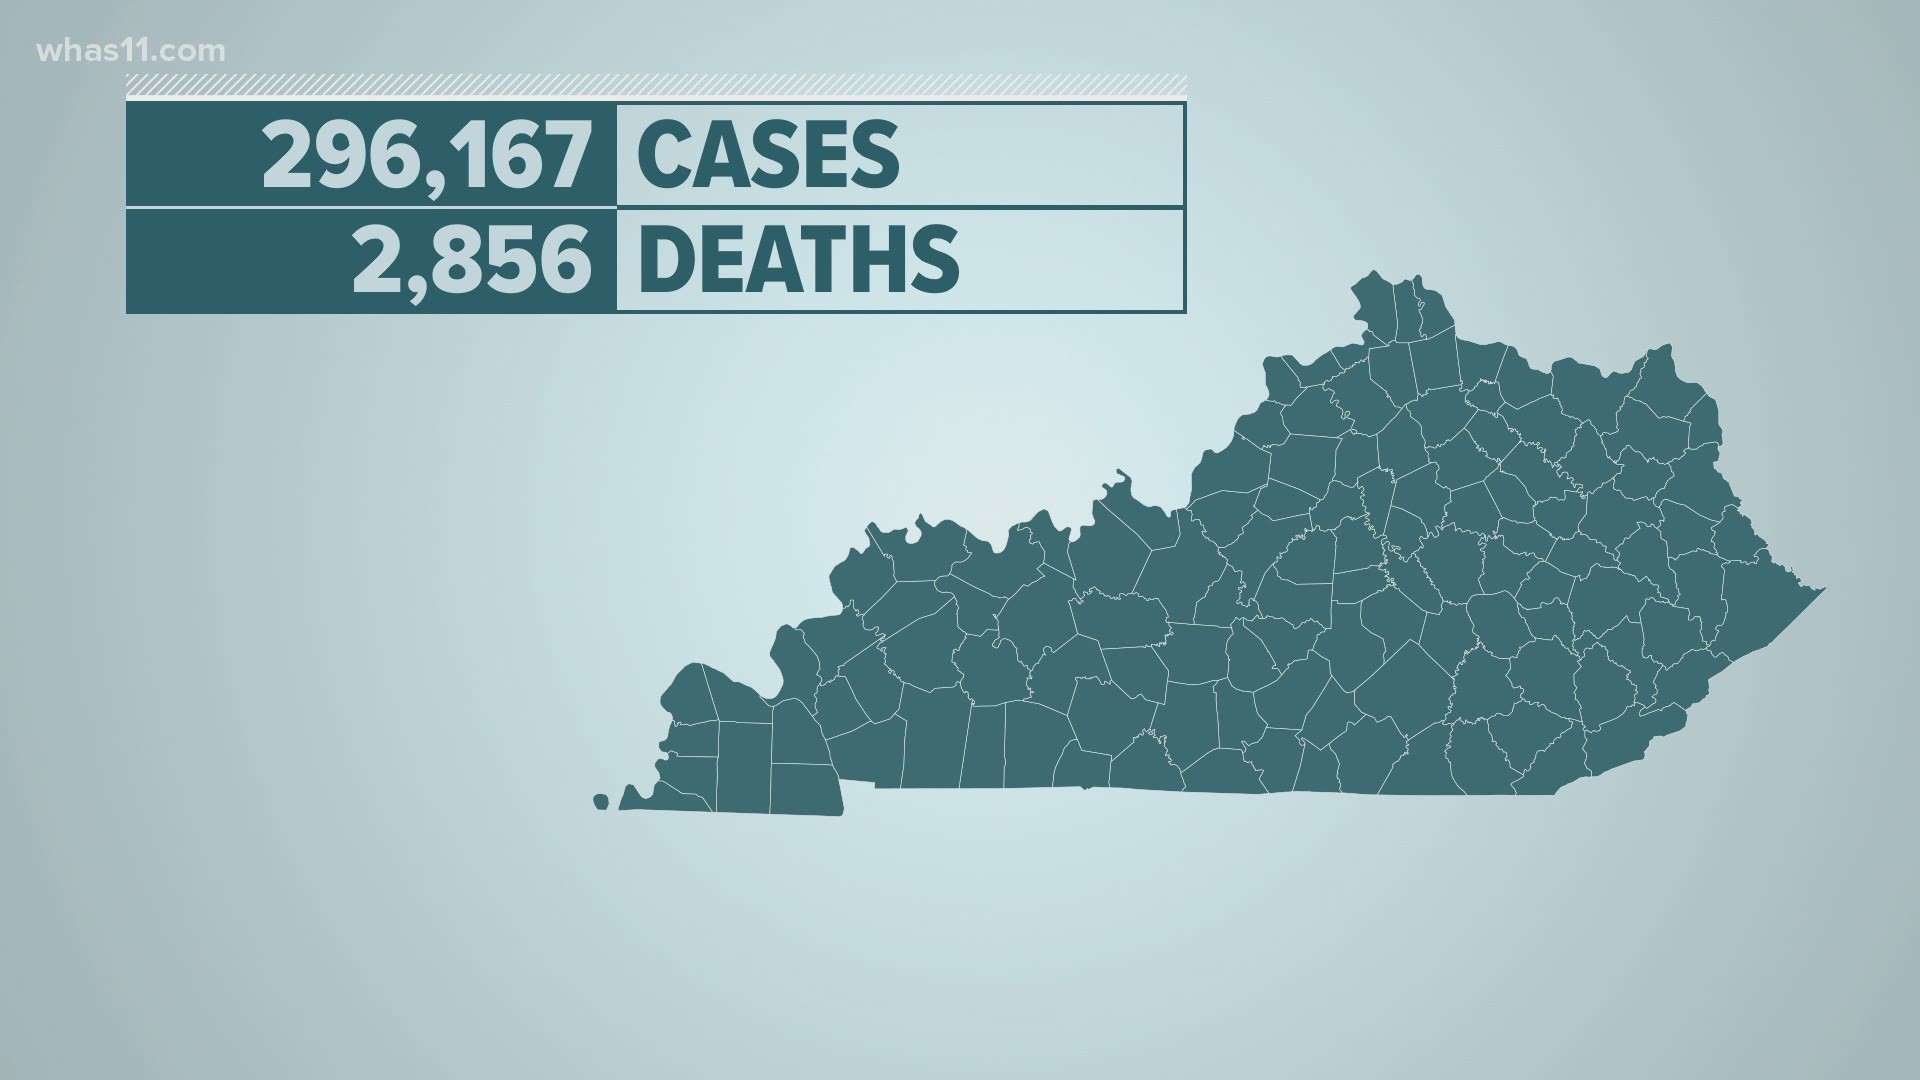 Gov. Beshear said holiday gatherings could have played a major factor in the recent surge of new COVID-19 cases.